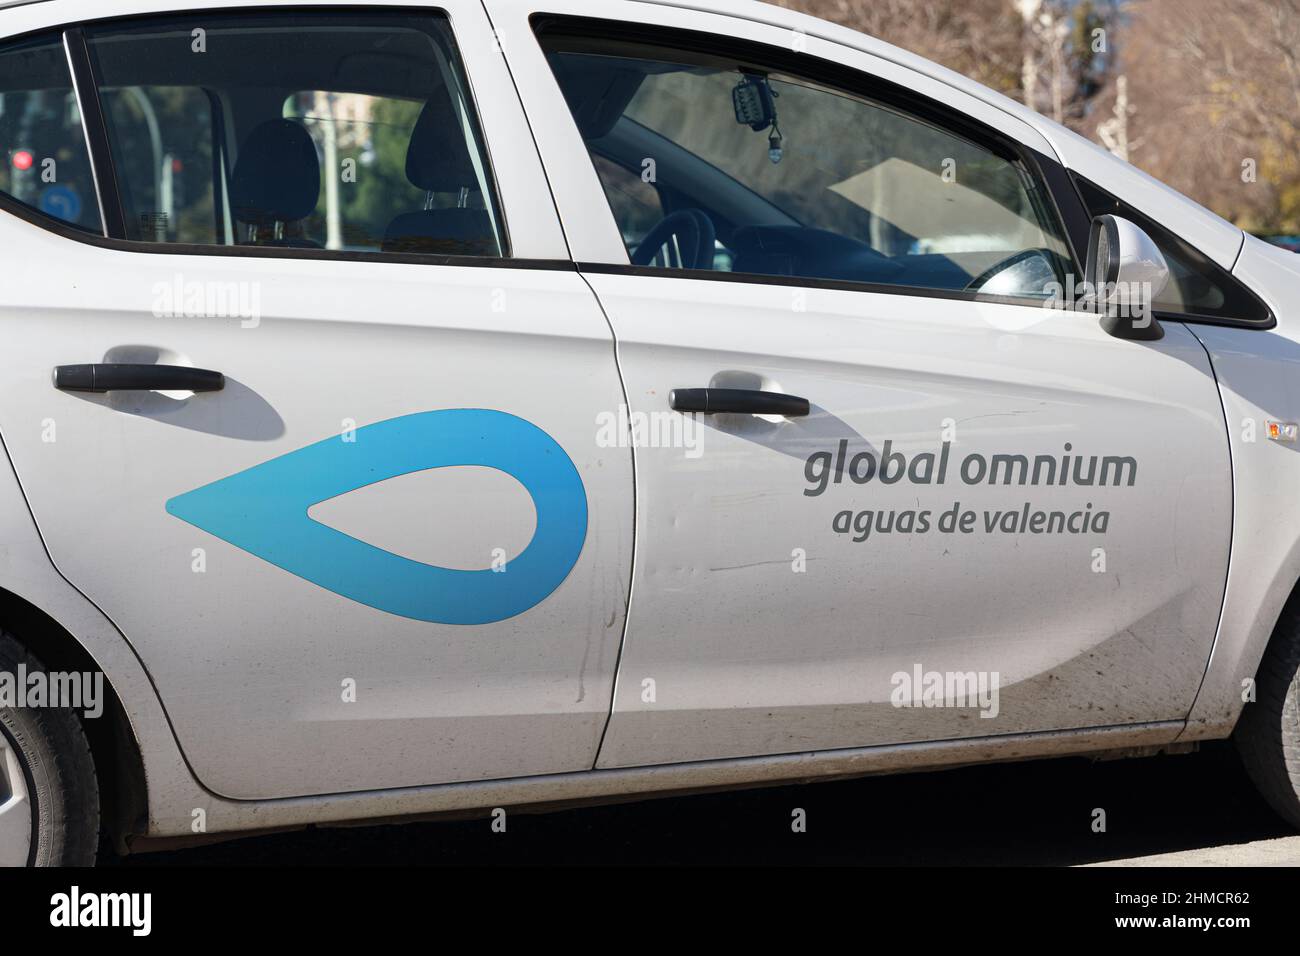 VALENCIA, SPAIN - FEBRUARY 02, 2022: Global Omnium is a company specialized in the Integrated Water Cycle Stock Photo